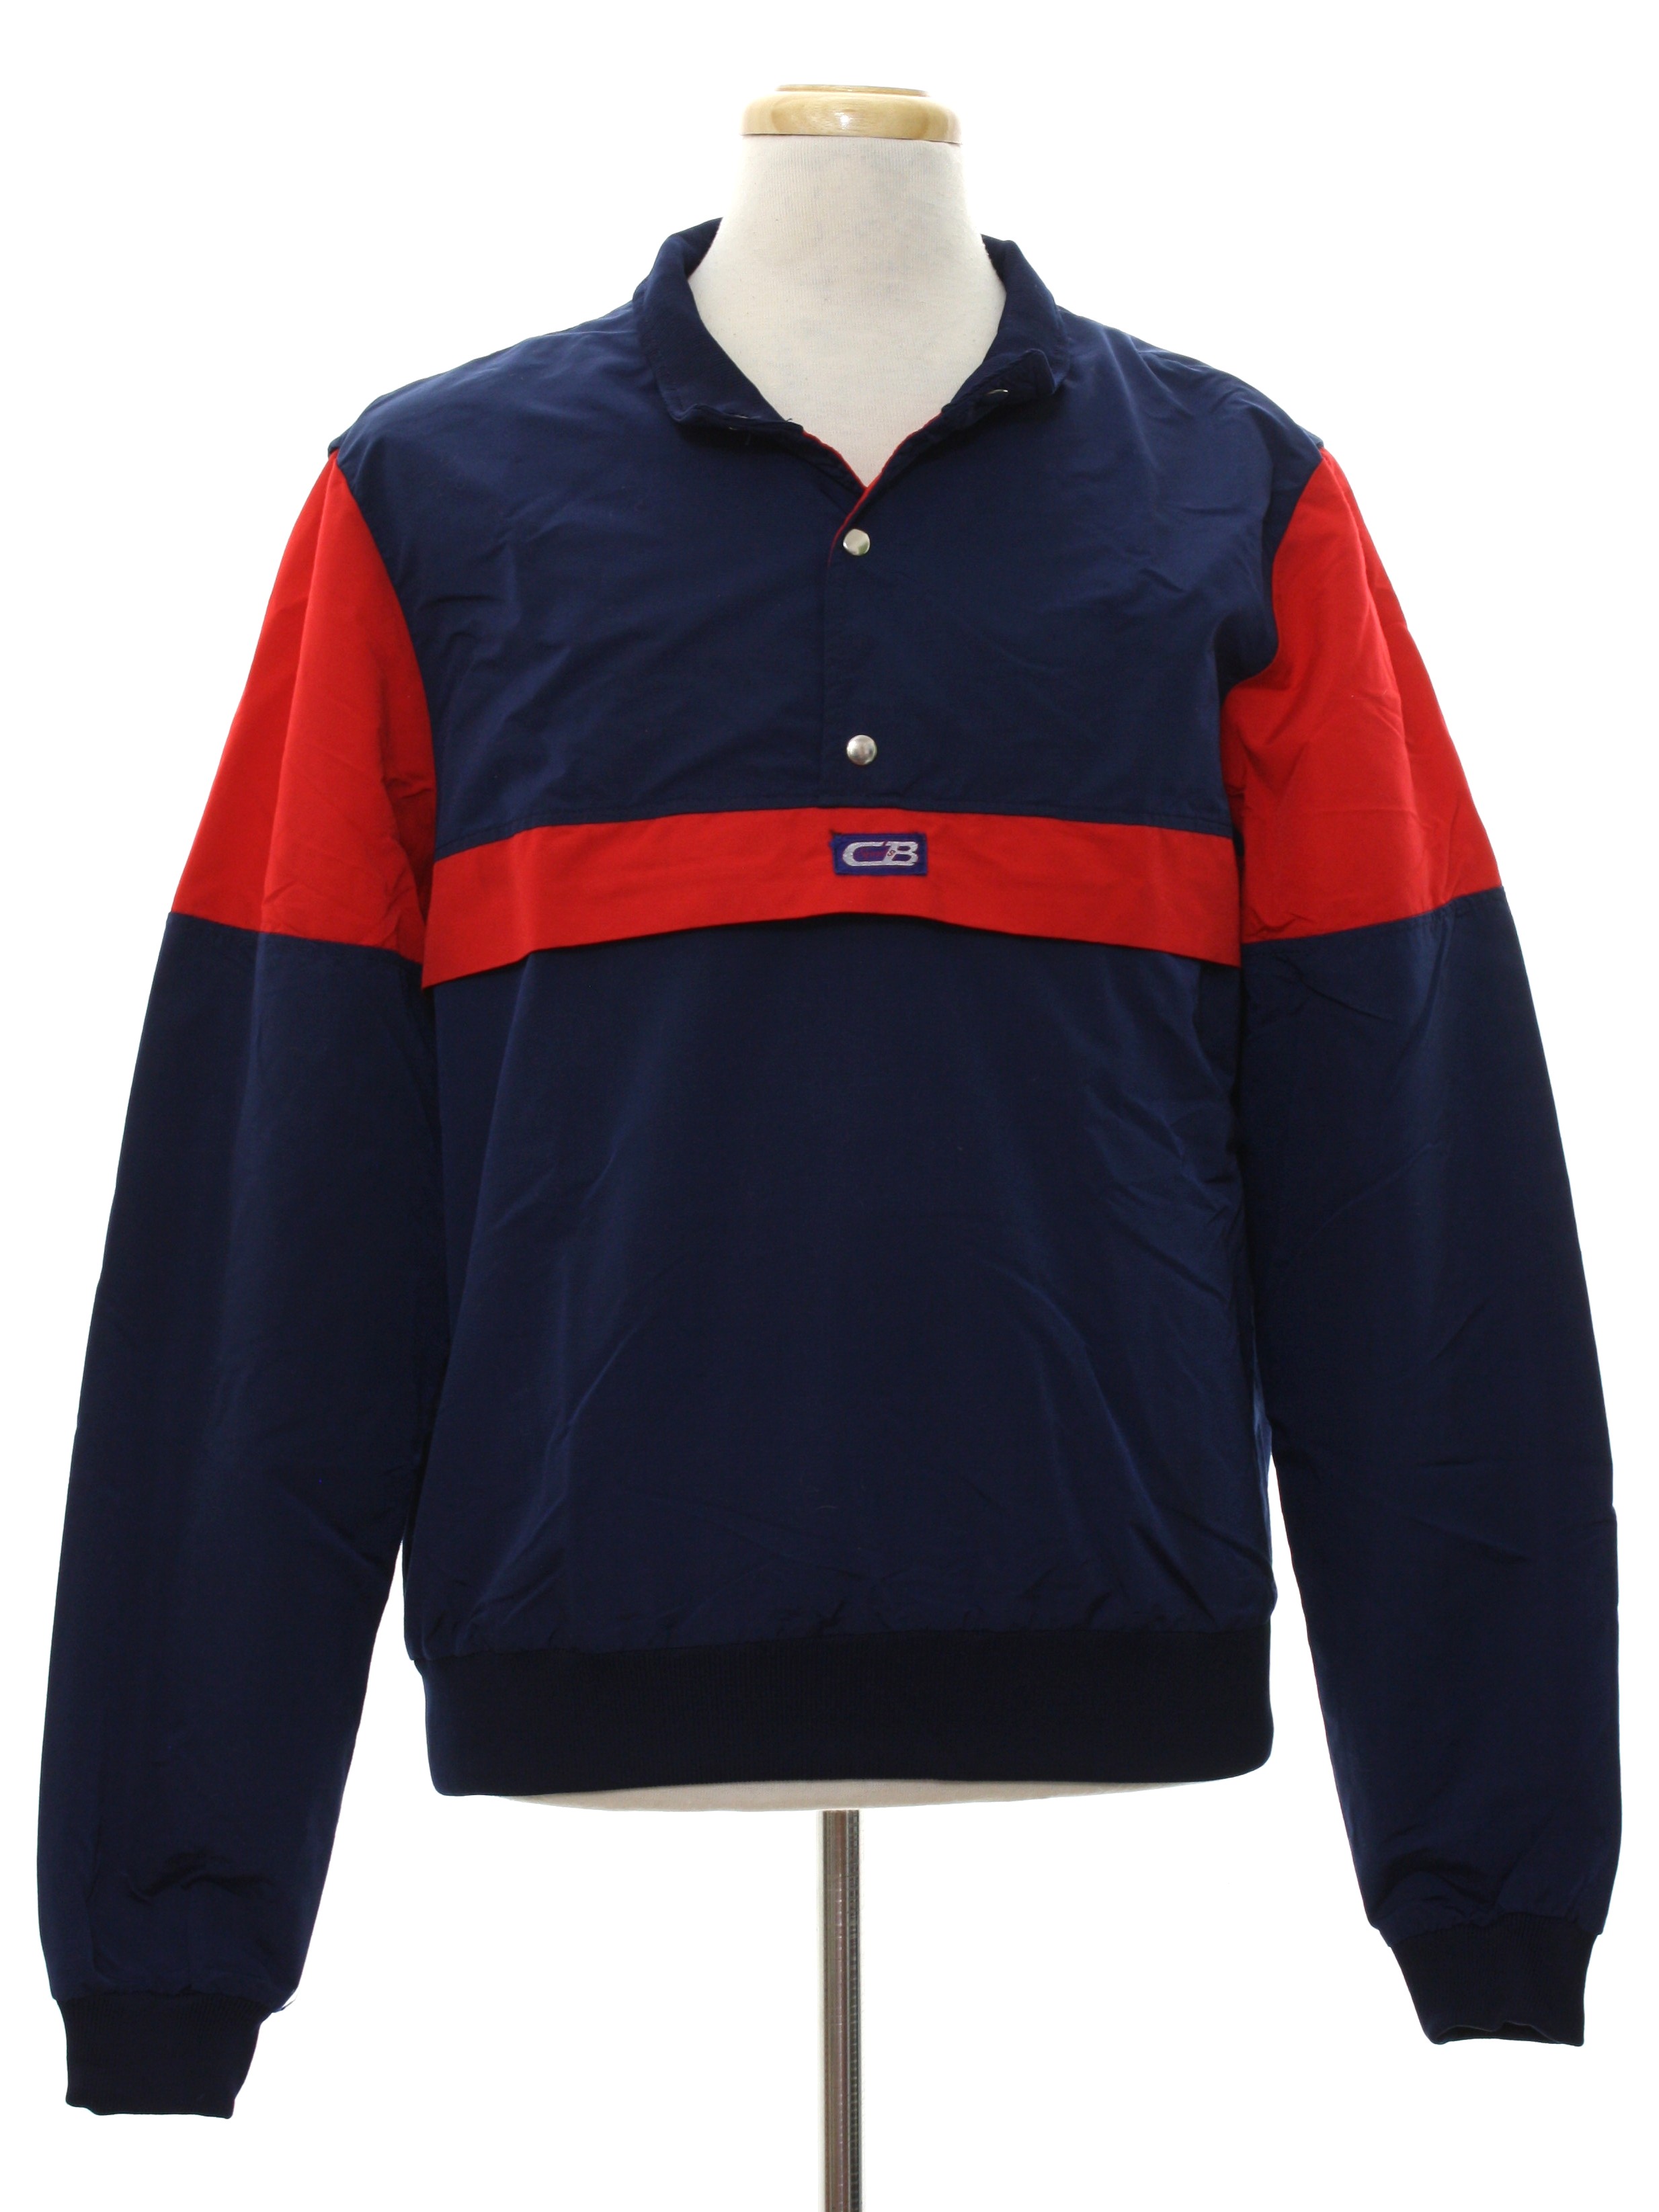 90s Retro Jacket: Early 90s -CB Sports- Mens midnight blue and red ...